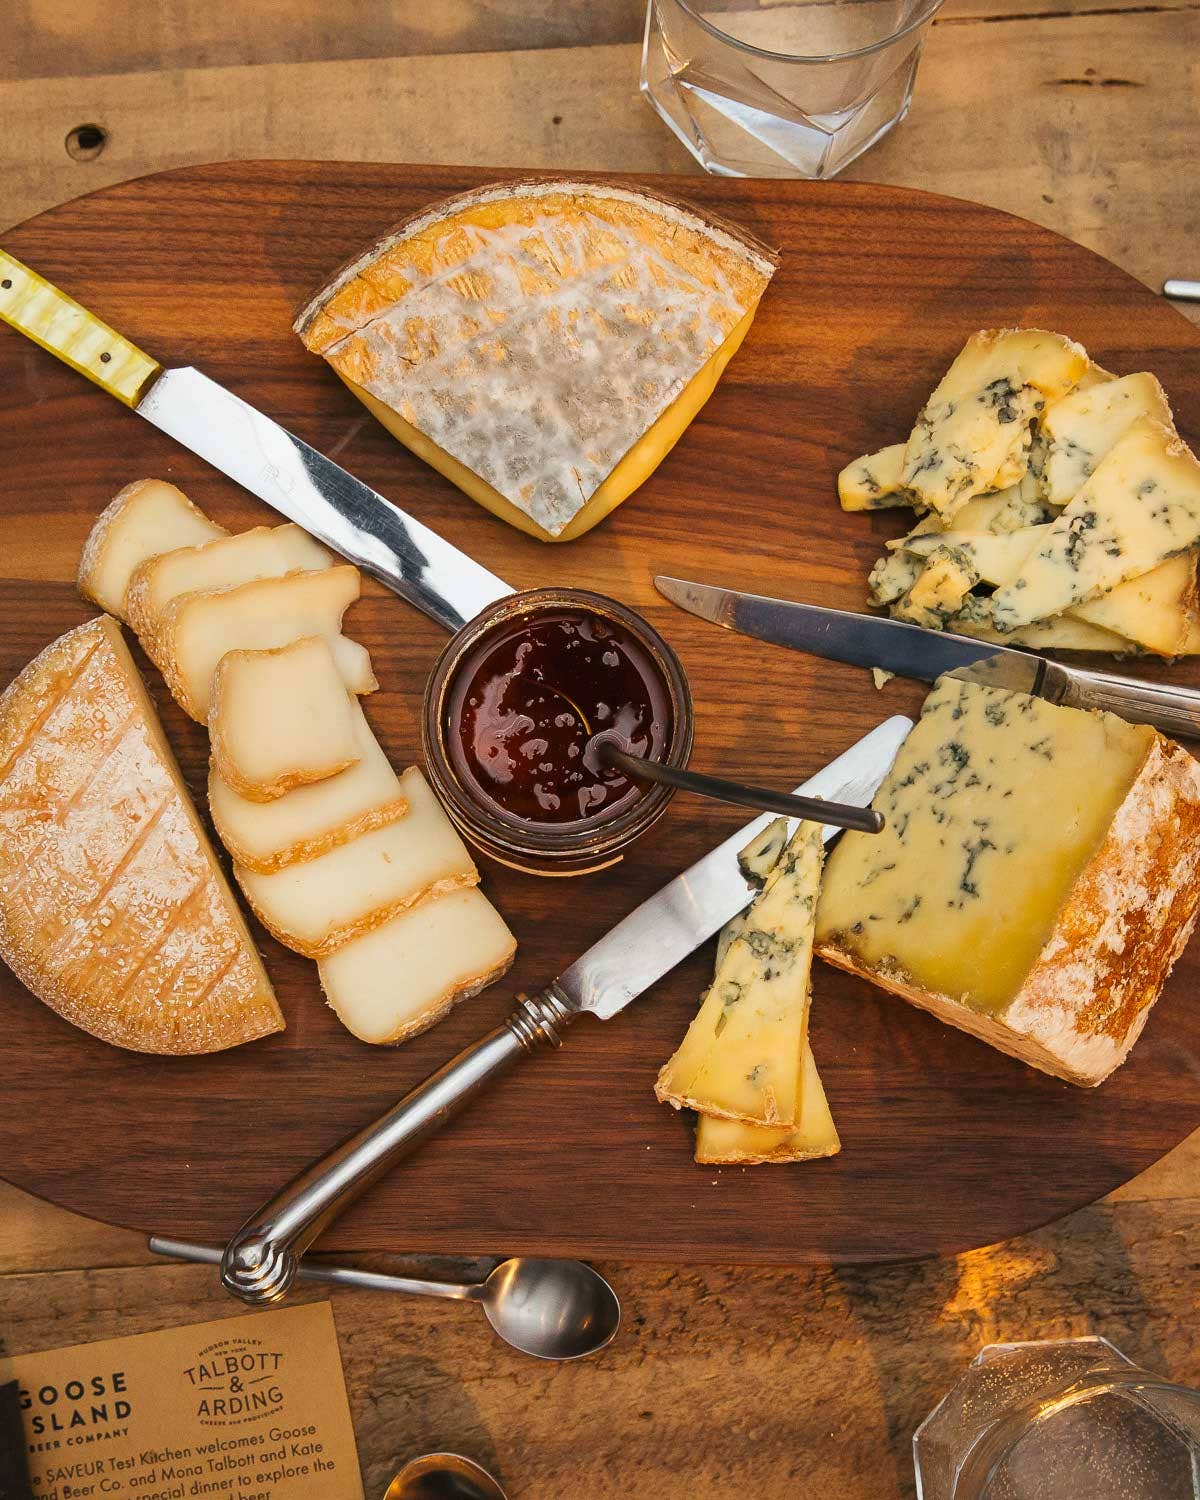 Goose Island Beer and Cheese Pair Up in the Saveur Test Kitchen